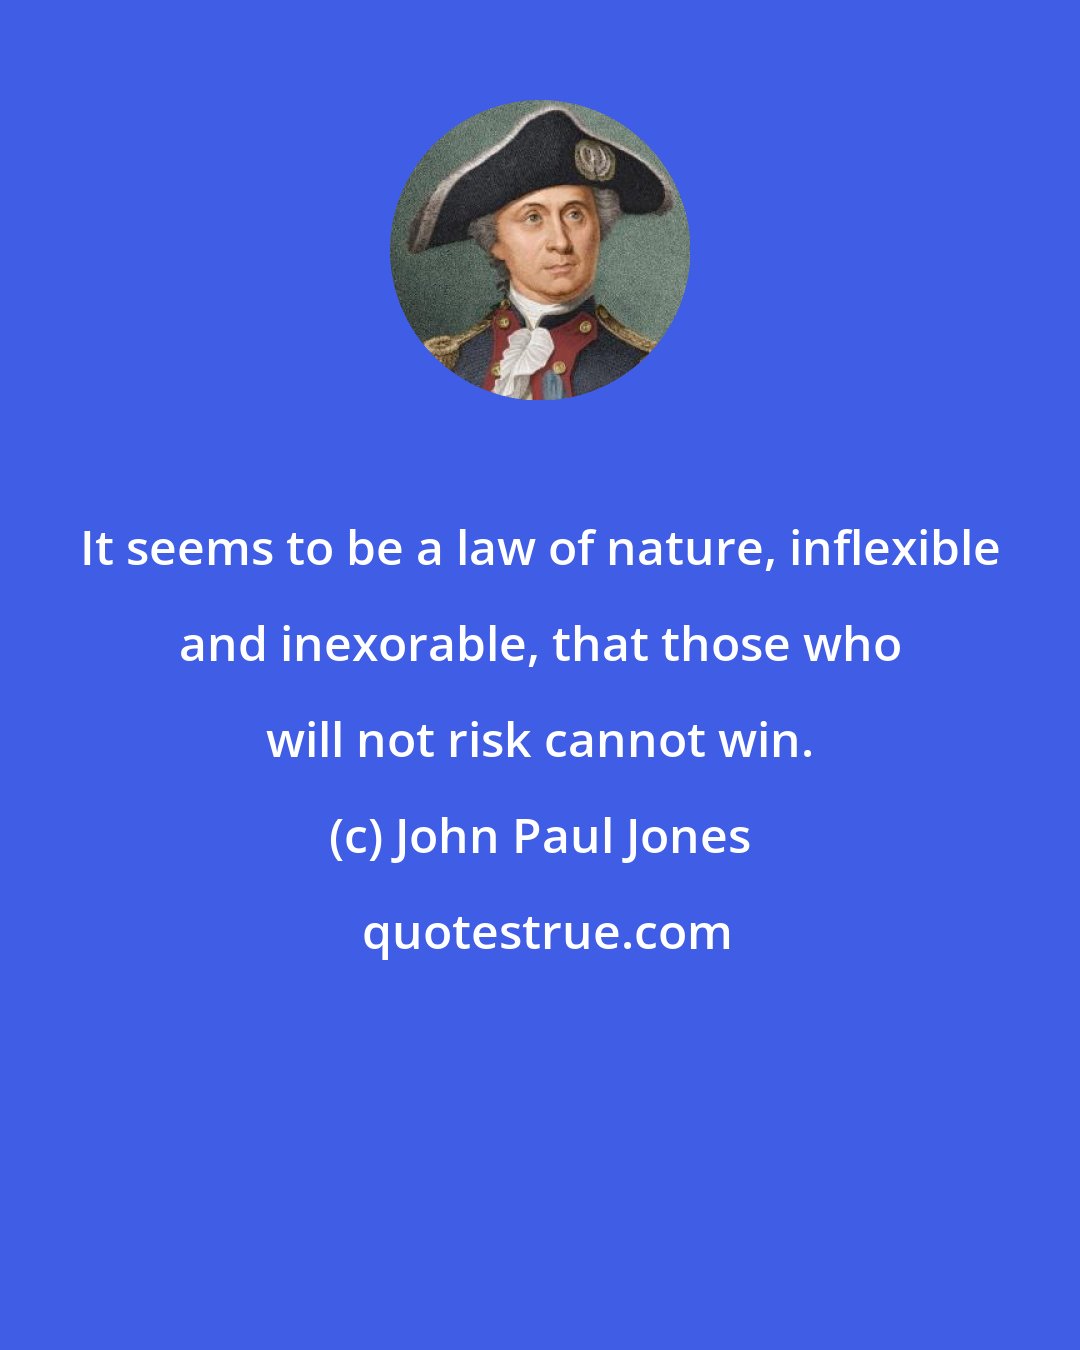 John Paul Jones: It seems to be a law of nature, inflexible and inexorable, that those who will not risk cannot win.